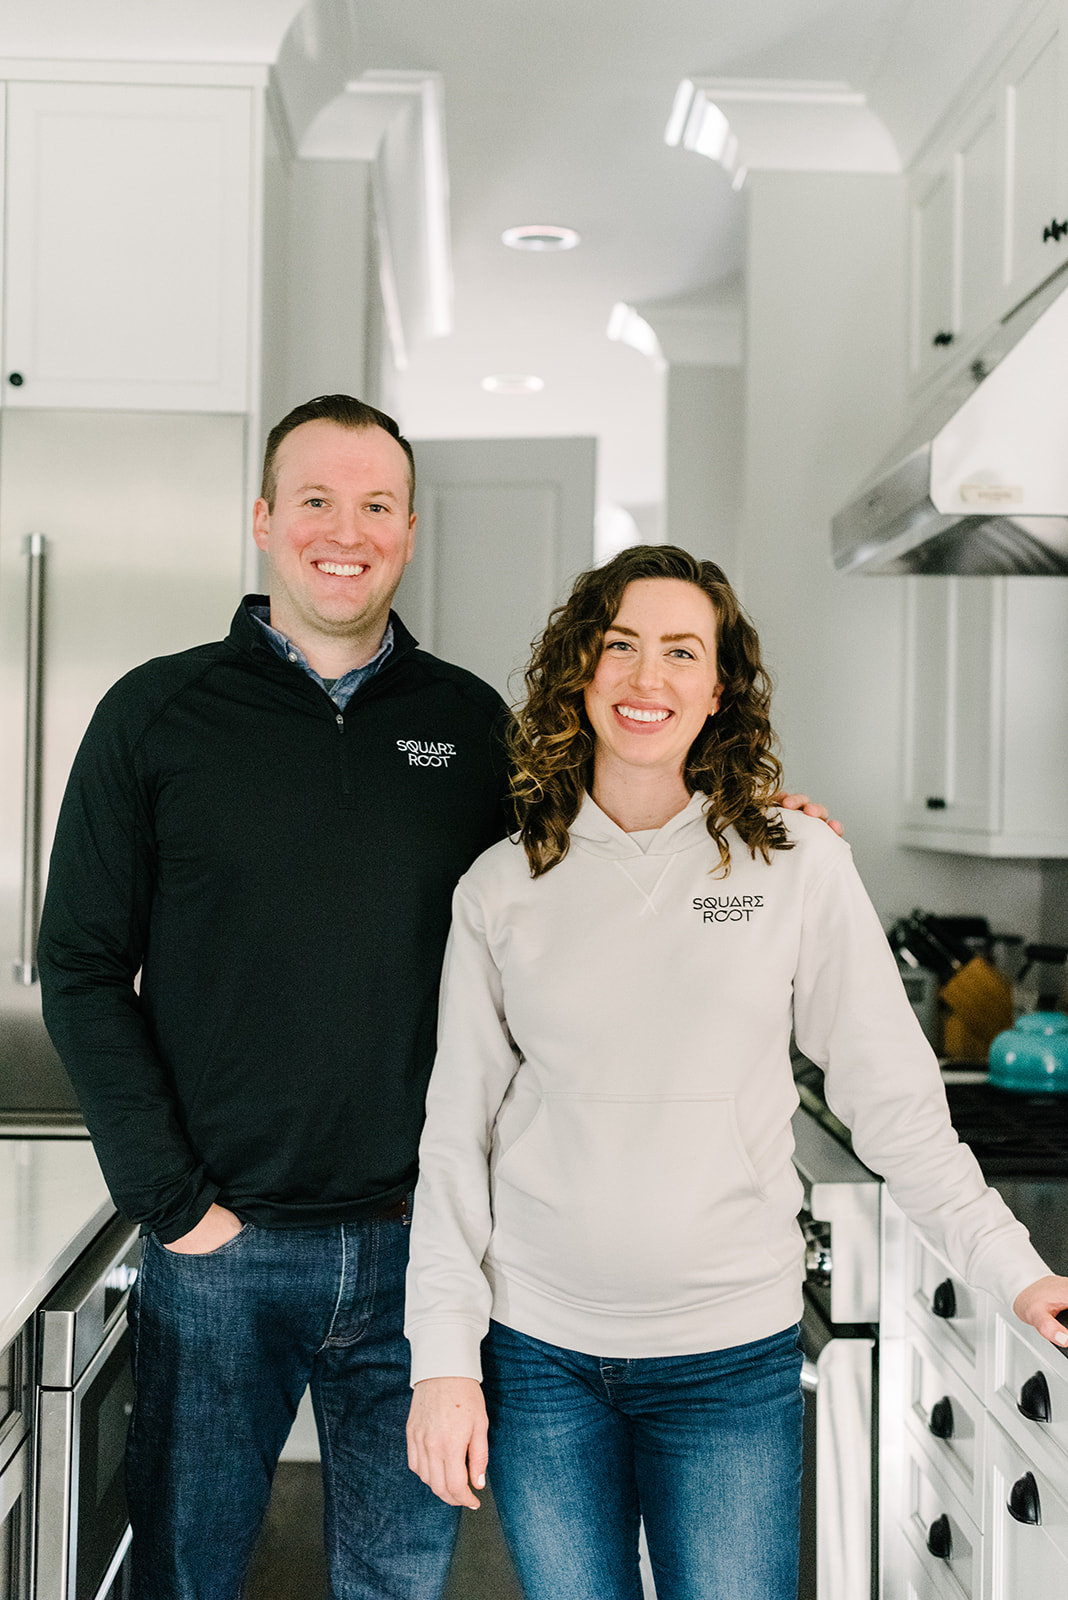 Husband-wife team Pat and Ellie O’Brien cofounded Square Root, a health foods business based in Chicago selling certified gluten-free, grain-free, vegan and paleo snacks.